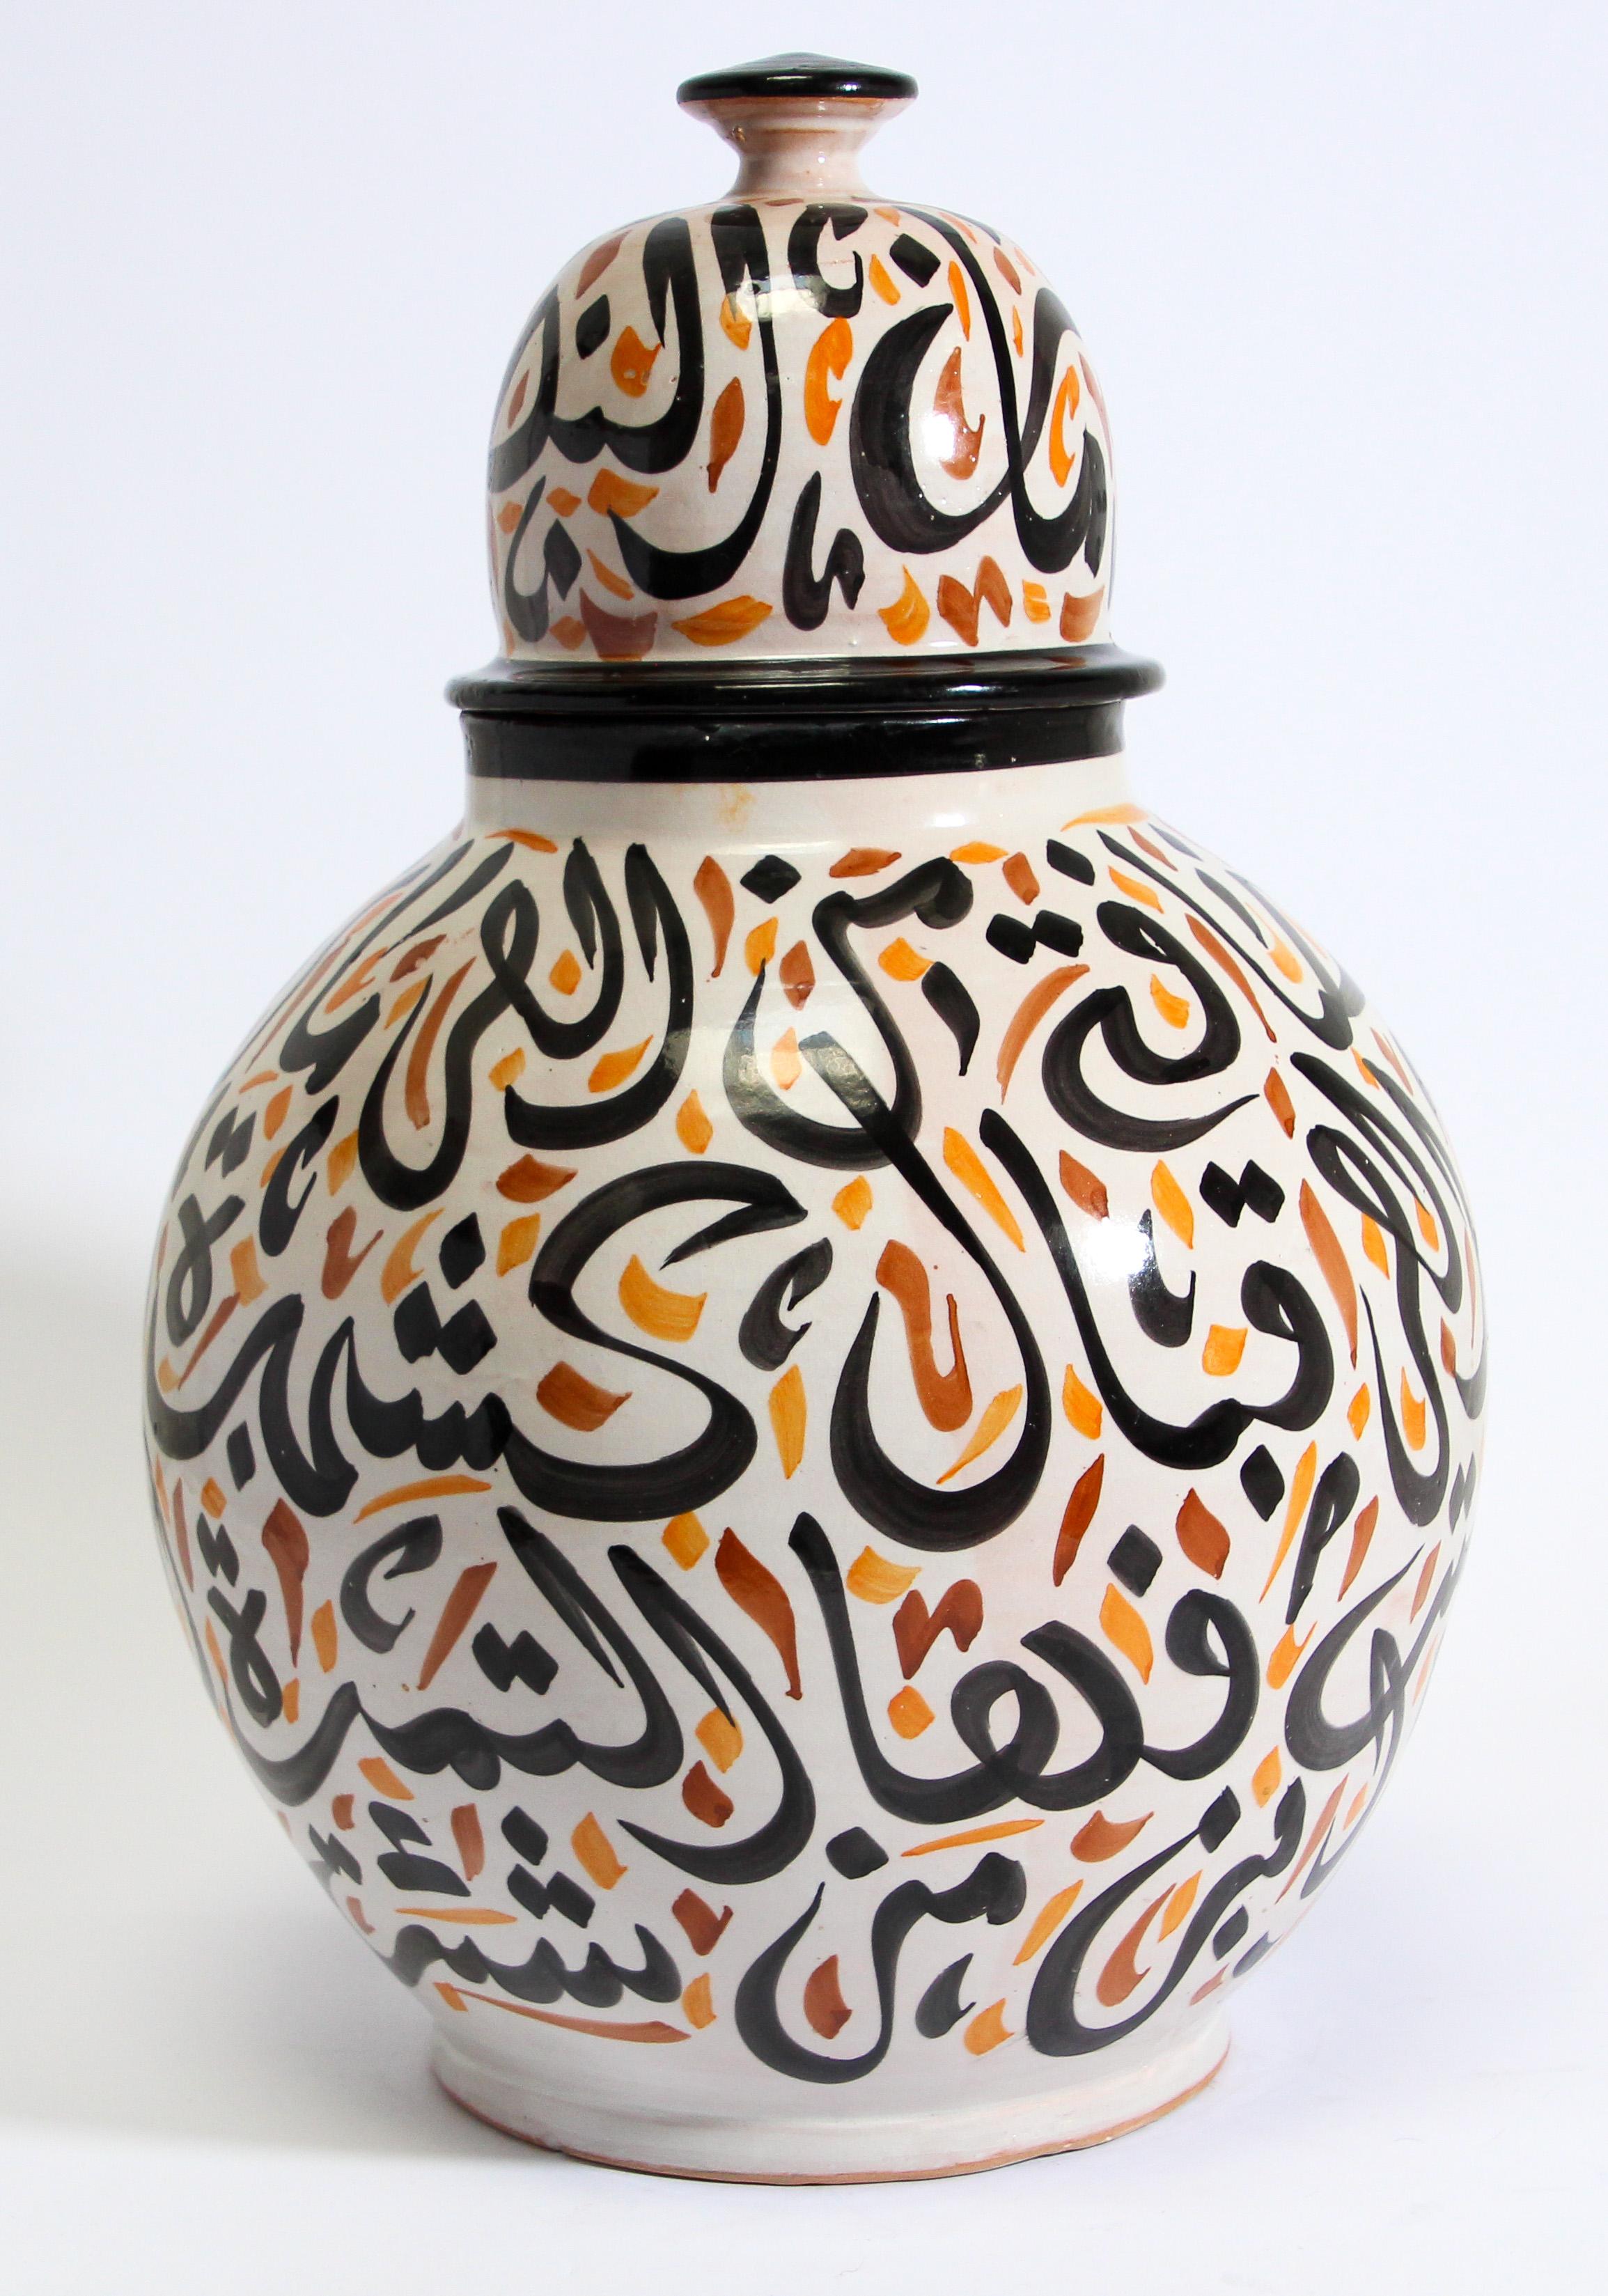 Moroccan Ceramic Lidded Urn with Arabic Calligraphy Lettrism Writing In Good Condition For Sale In North Hollywood, CA